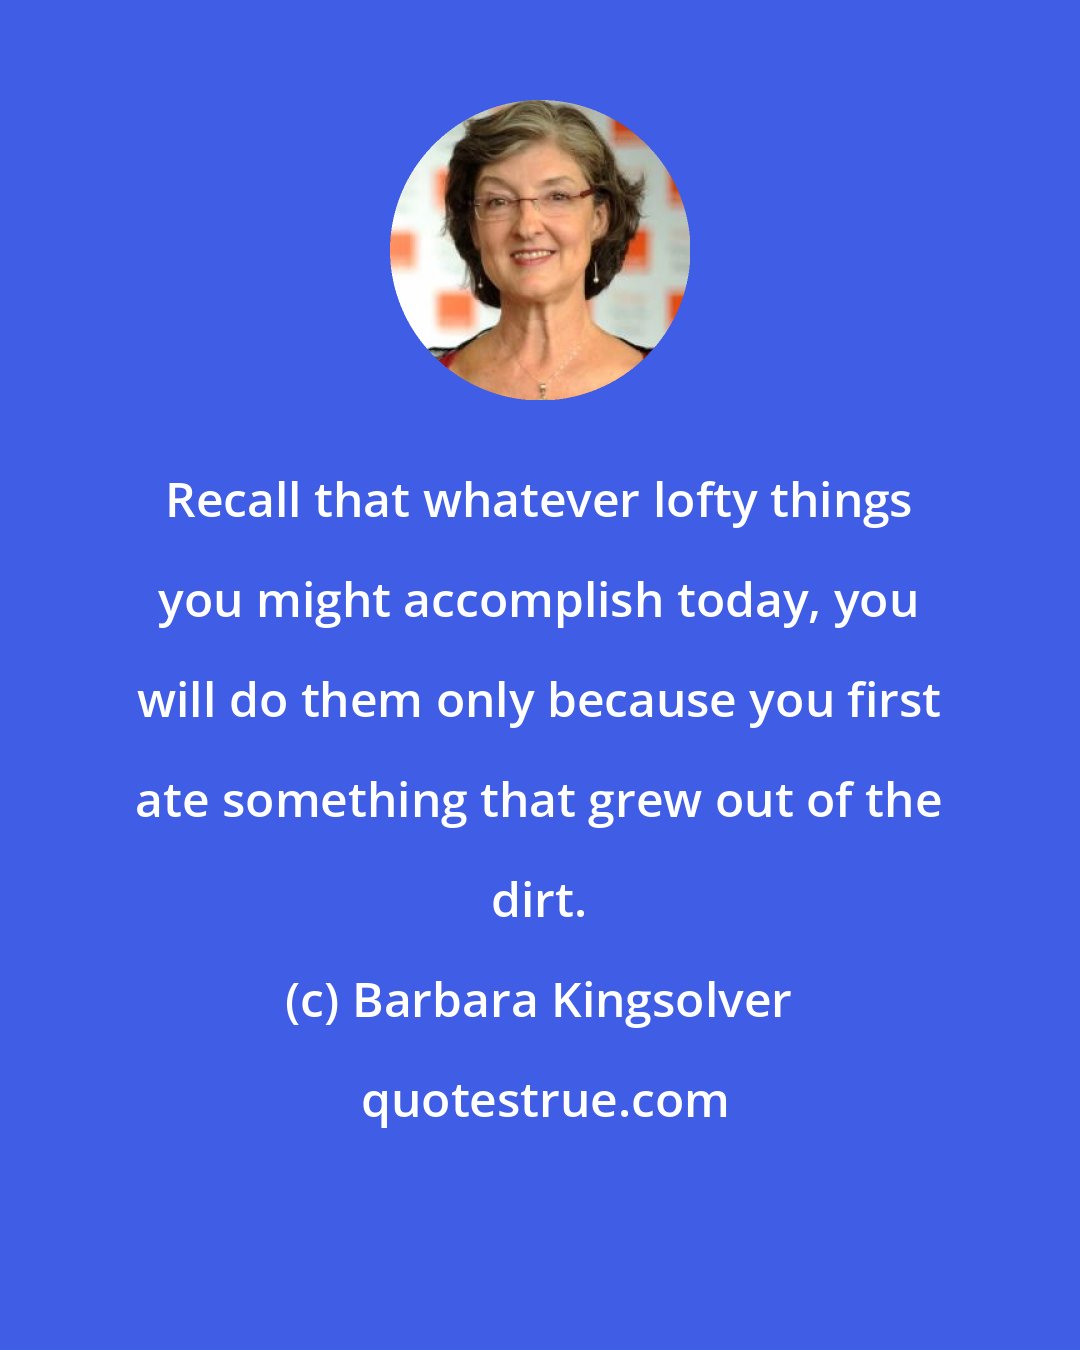 Barbara Kingsolver: Recall that whatever lofty things you might accomplish today, you will do them only because you first ate something that grew out of the dirt.